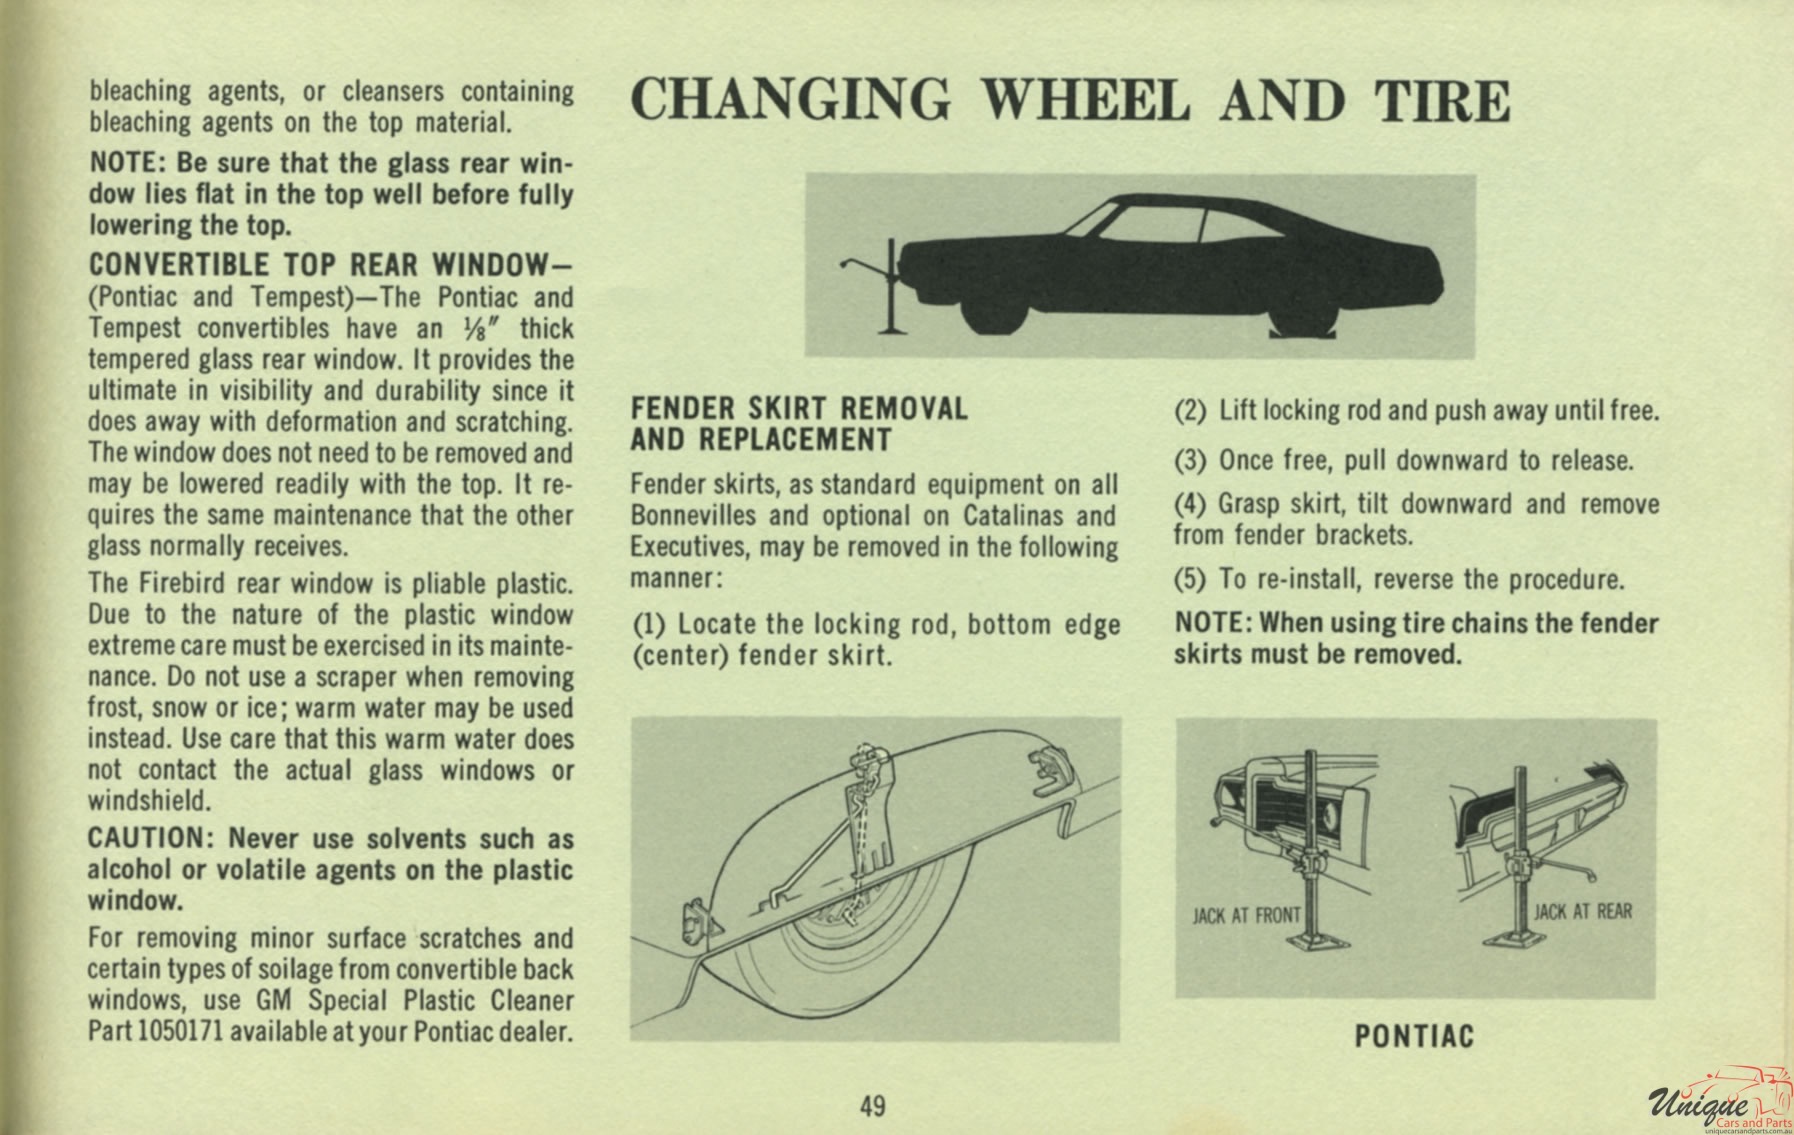 1969 Pontiac Owners Manual Page 51